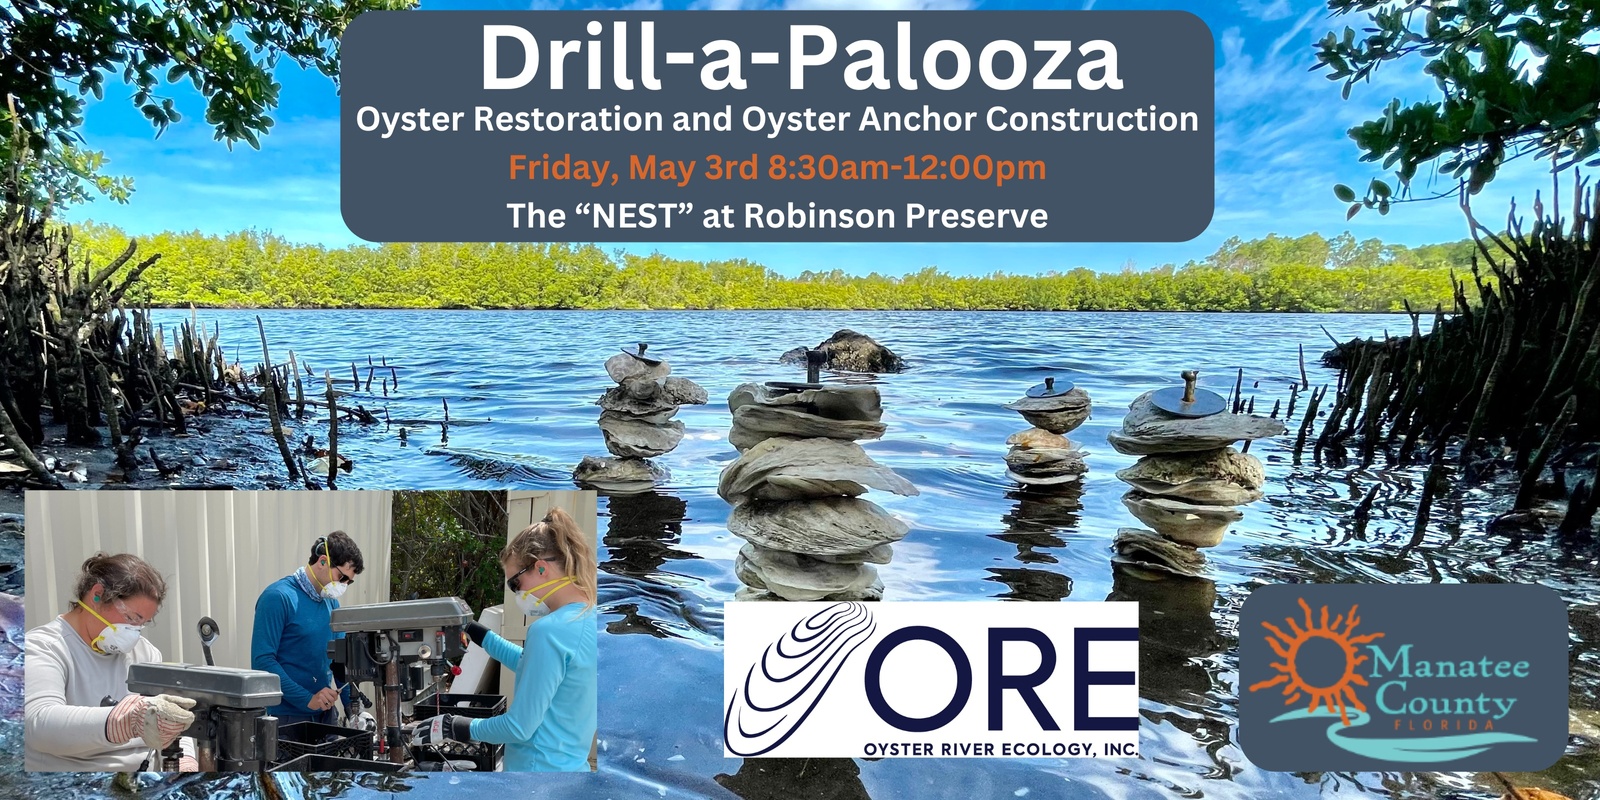 Banner image for Drill-a-Palooza: Oyster Restoration and Oyster Anchor Construction